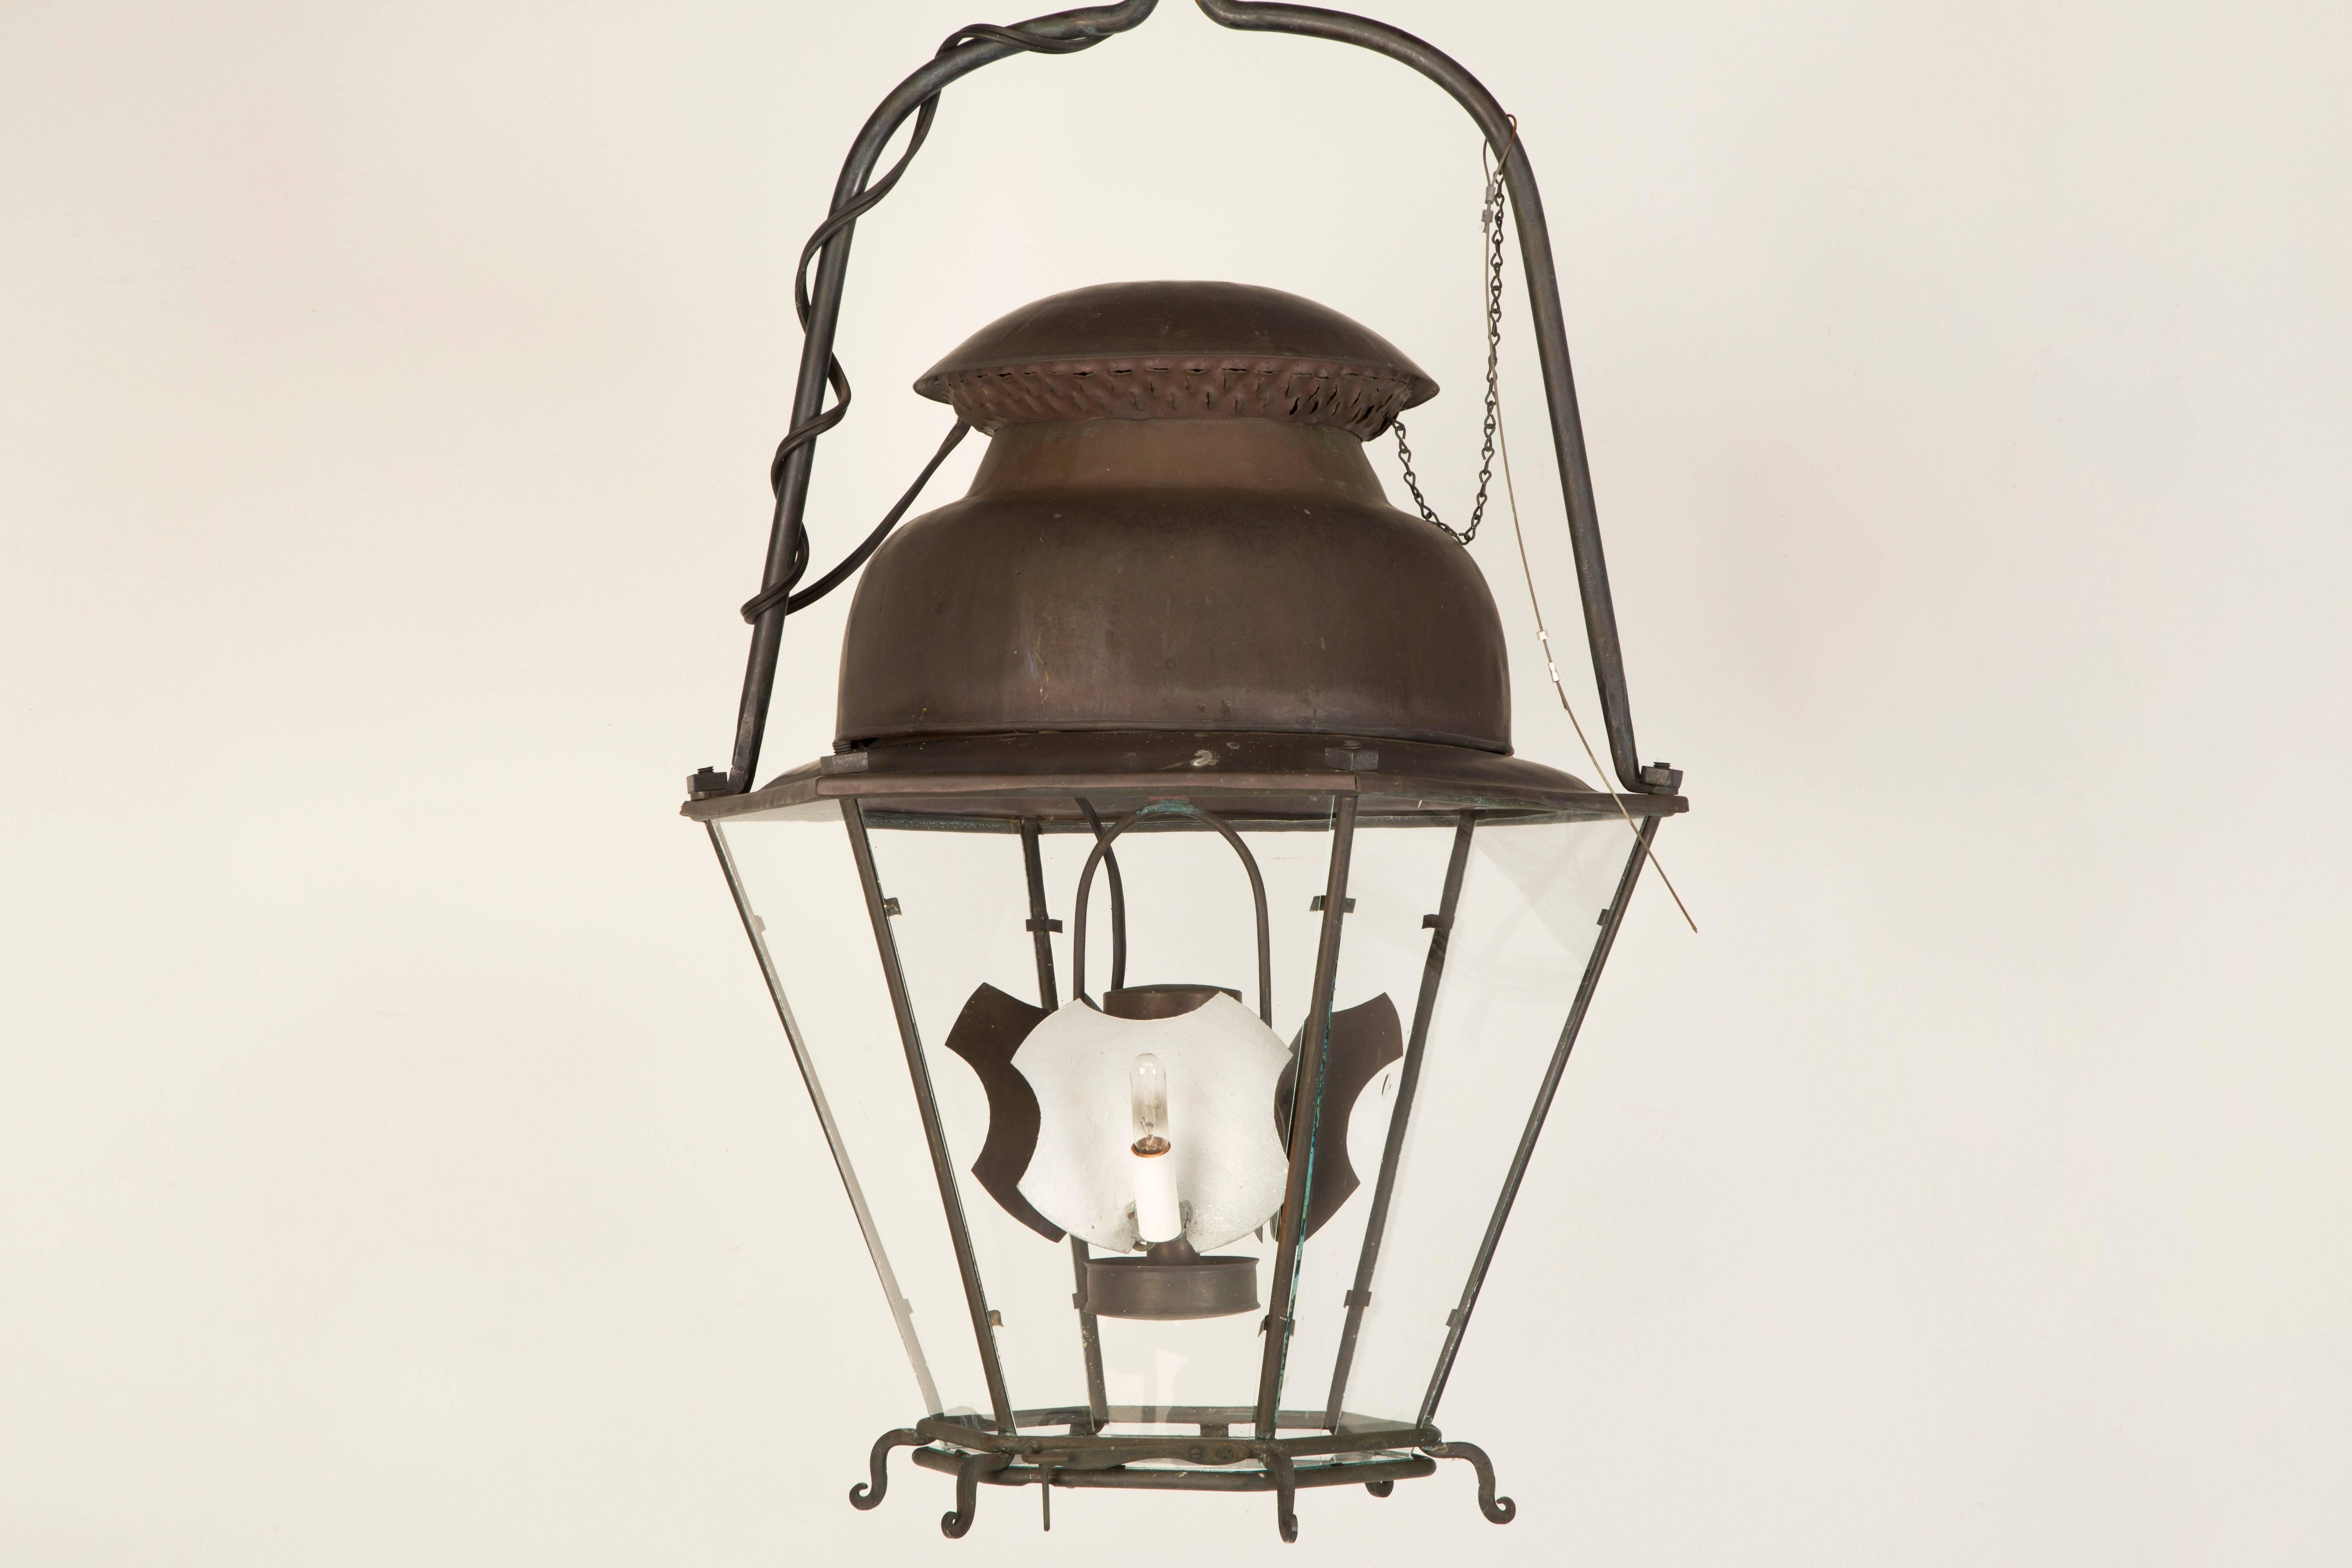 French 18th century style copper lanterns, recently hand-made by one of our craftsmen in Chicago. The French inspired copper lanterns were fabricated utilizing a set of blueprints from the Historical Division of the French Government. This